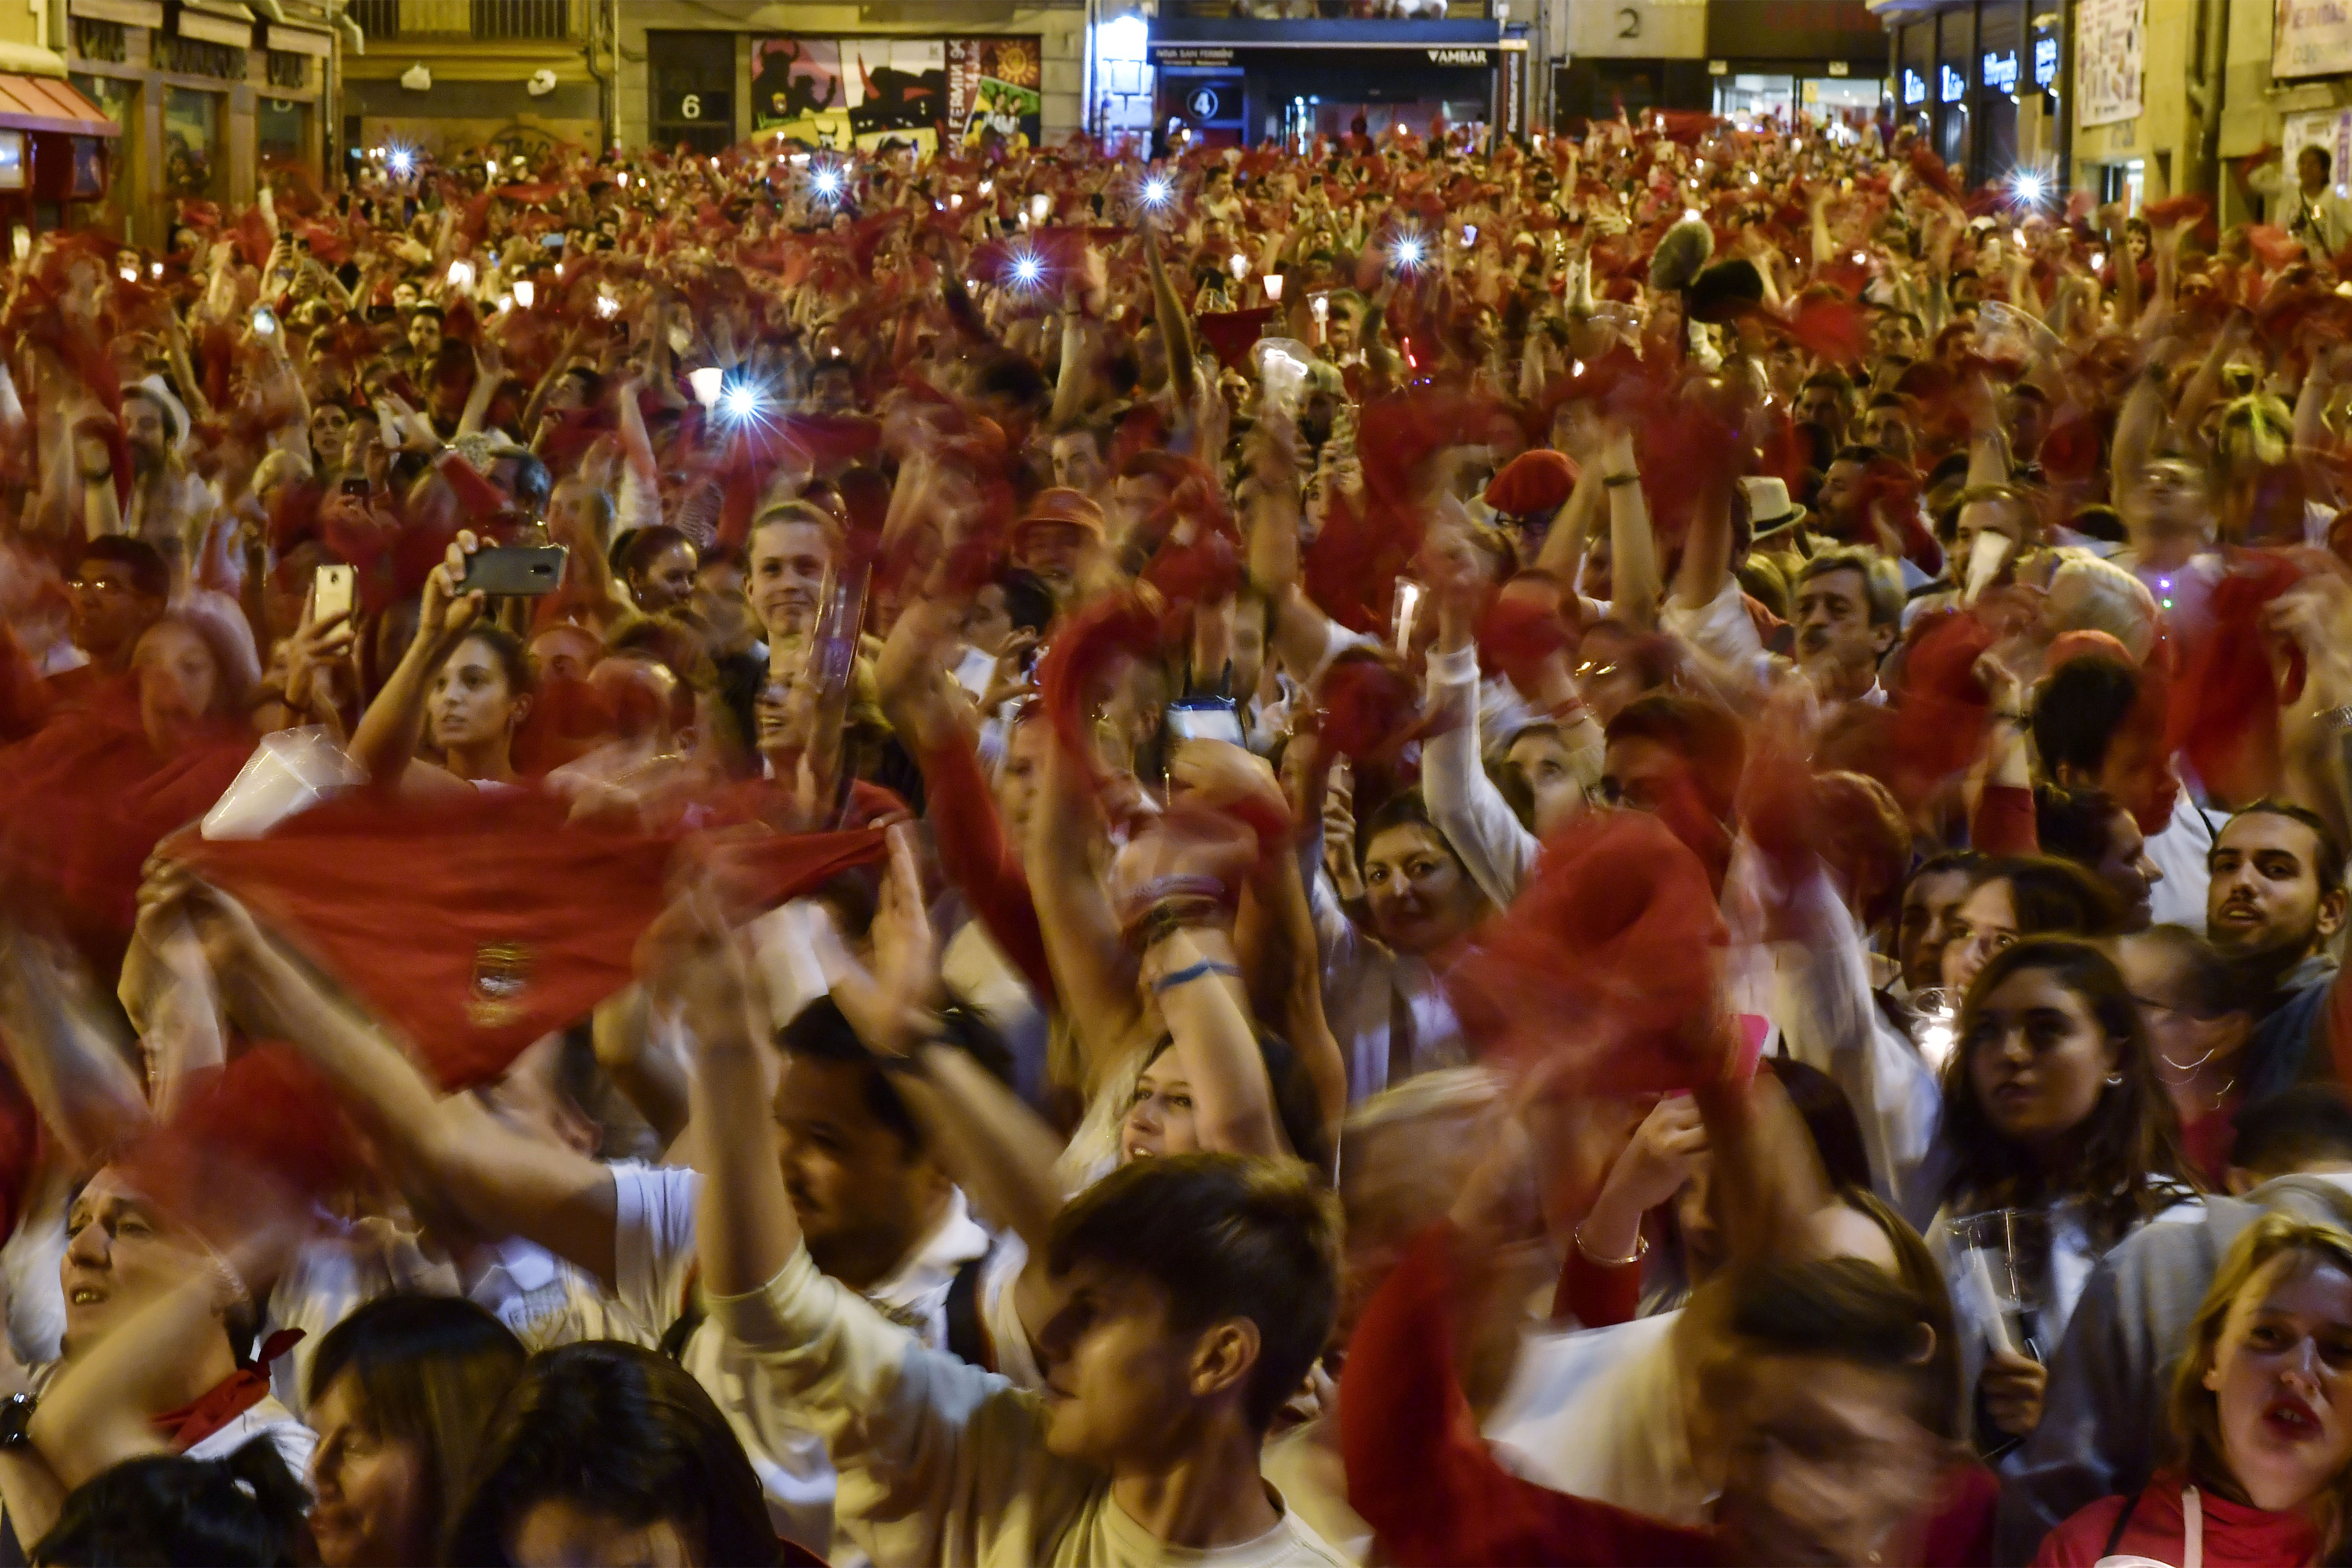 Revelers hold candles and red kerchief after singing a song ''Pobre de Mi'' to close nine days of the running of the bulls, music and dance at the San Fermin Festival, in Pamplona, northern Spain, Monday, July 15, 2019. (AP Photo/Alvaro Barrientos)